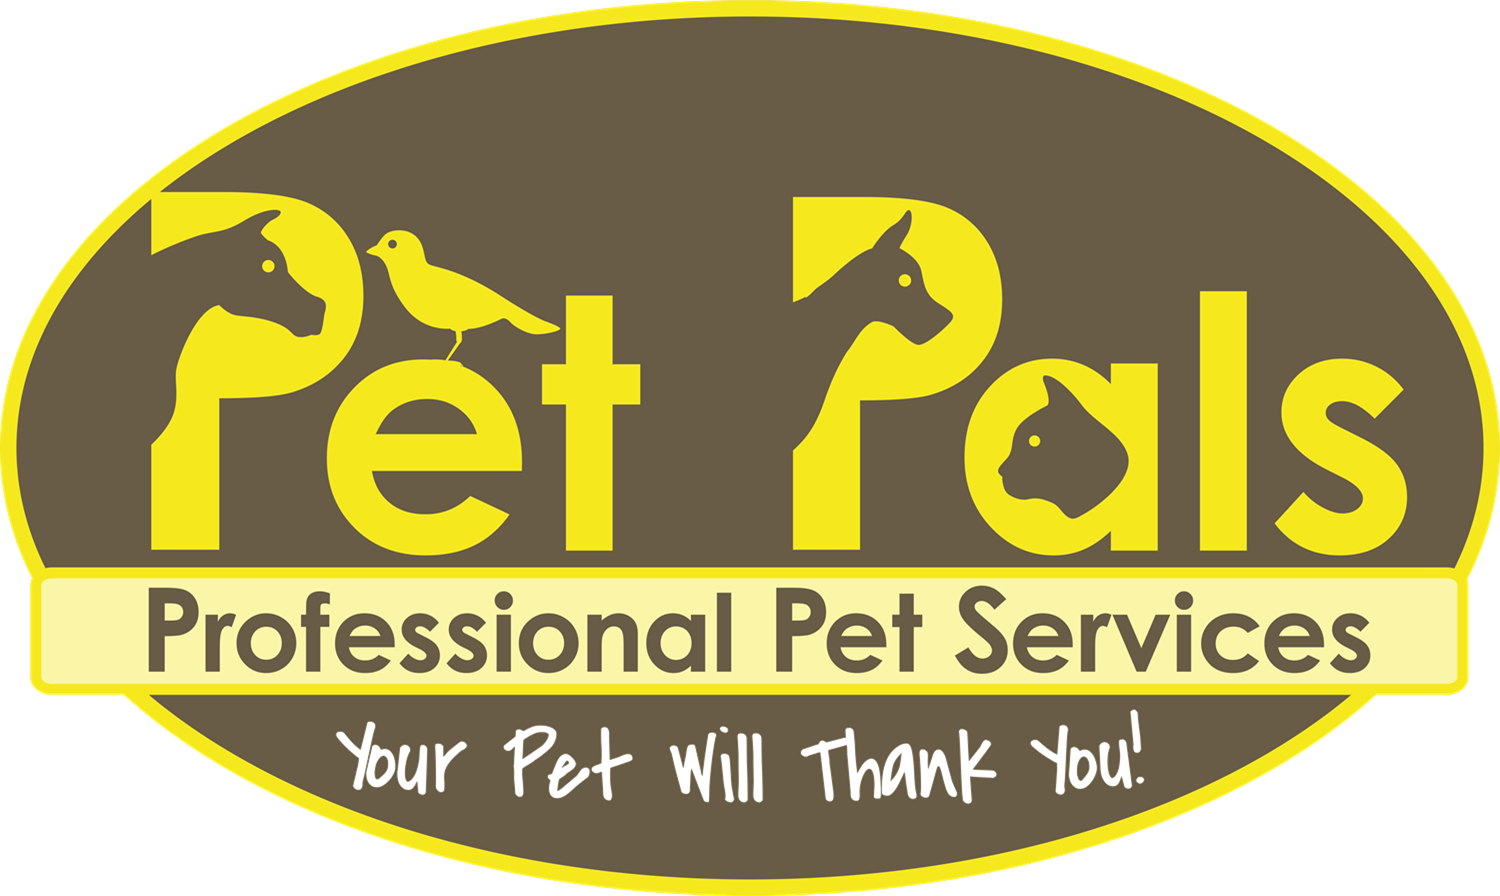 Hire Pet Pals for dog walking, dog sitting, cat sitting, doggy daycare, and more!